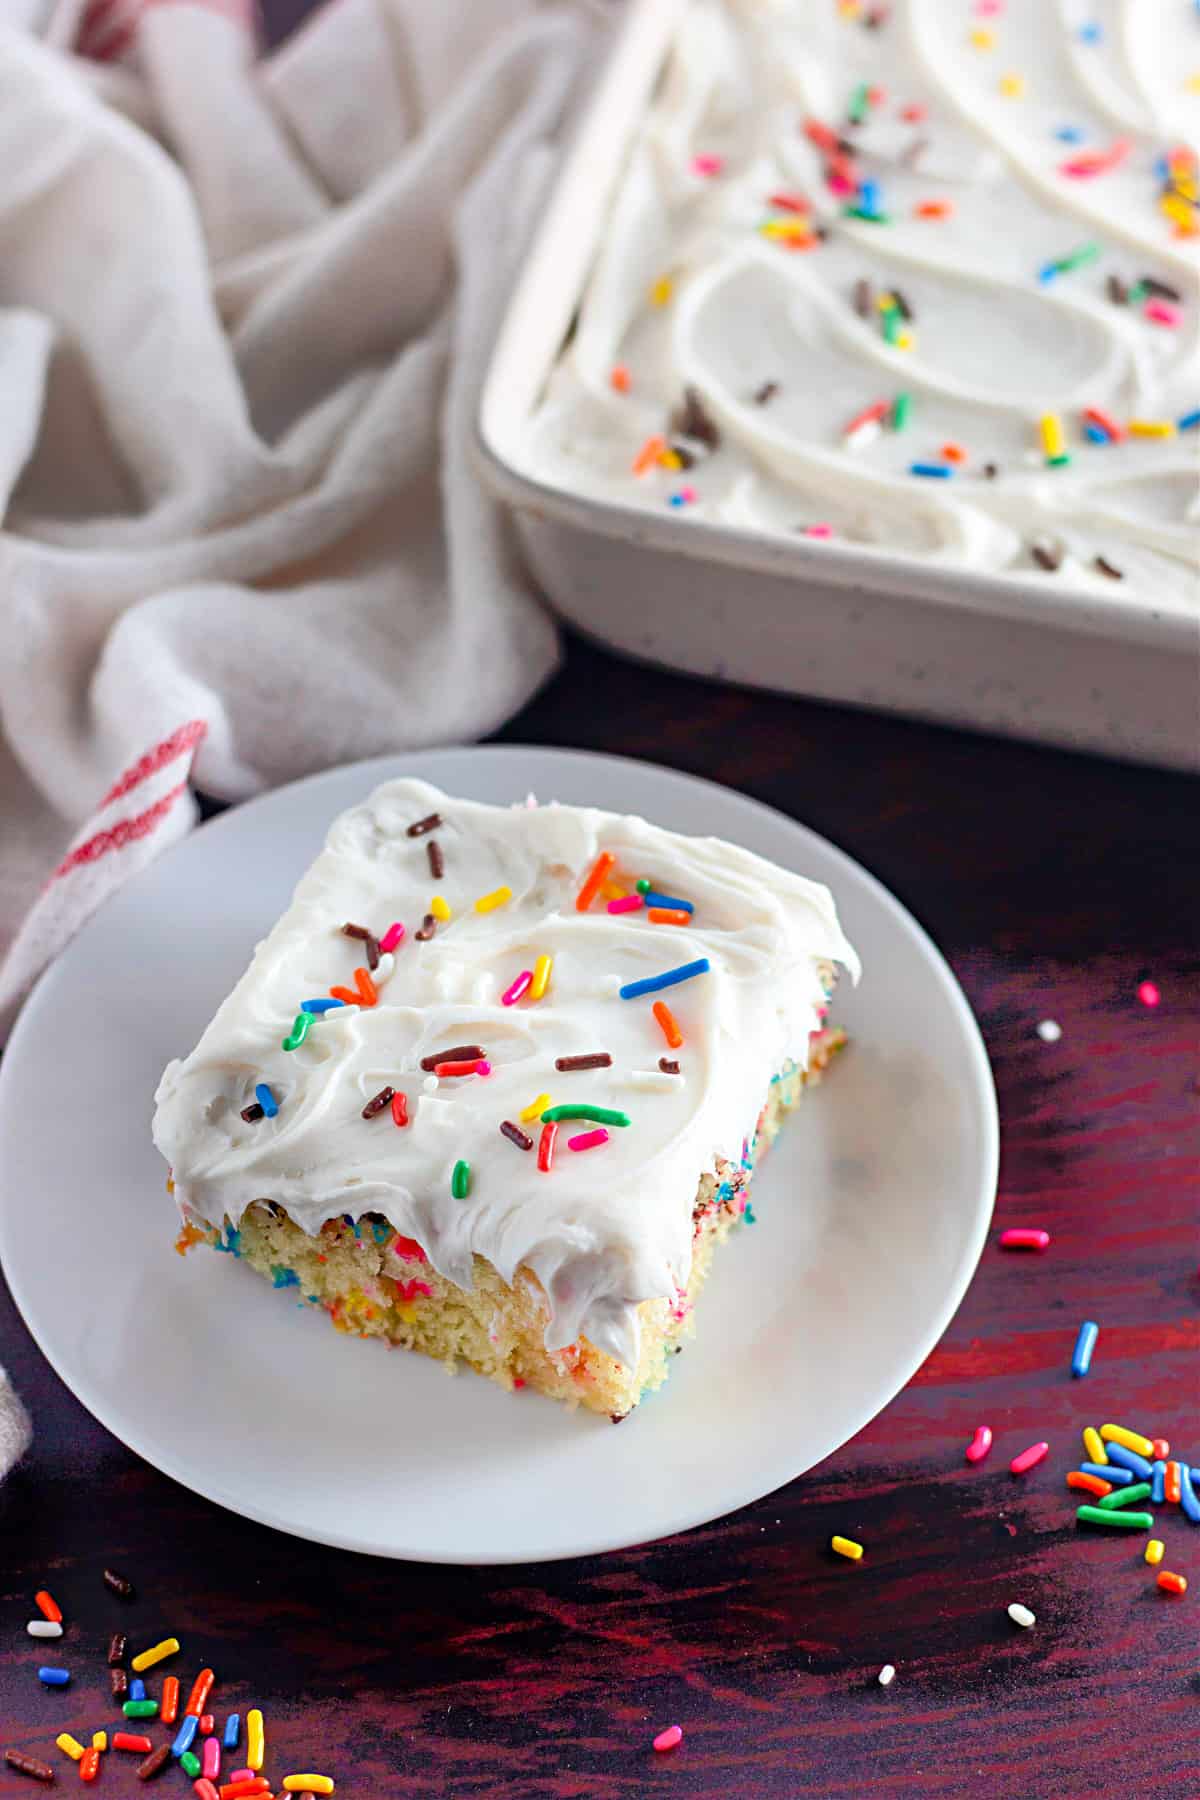 Slice of vanilla wacky cake on a plate, with frosting and funfetti.